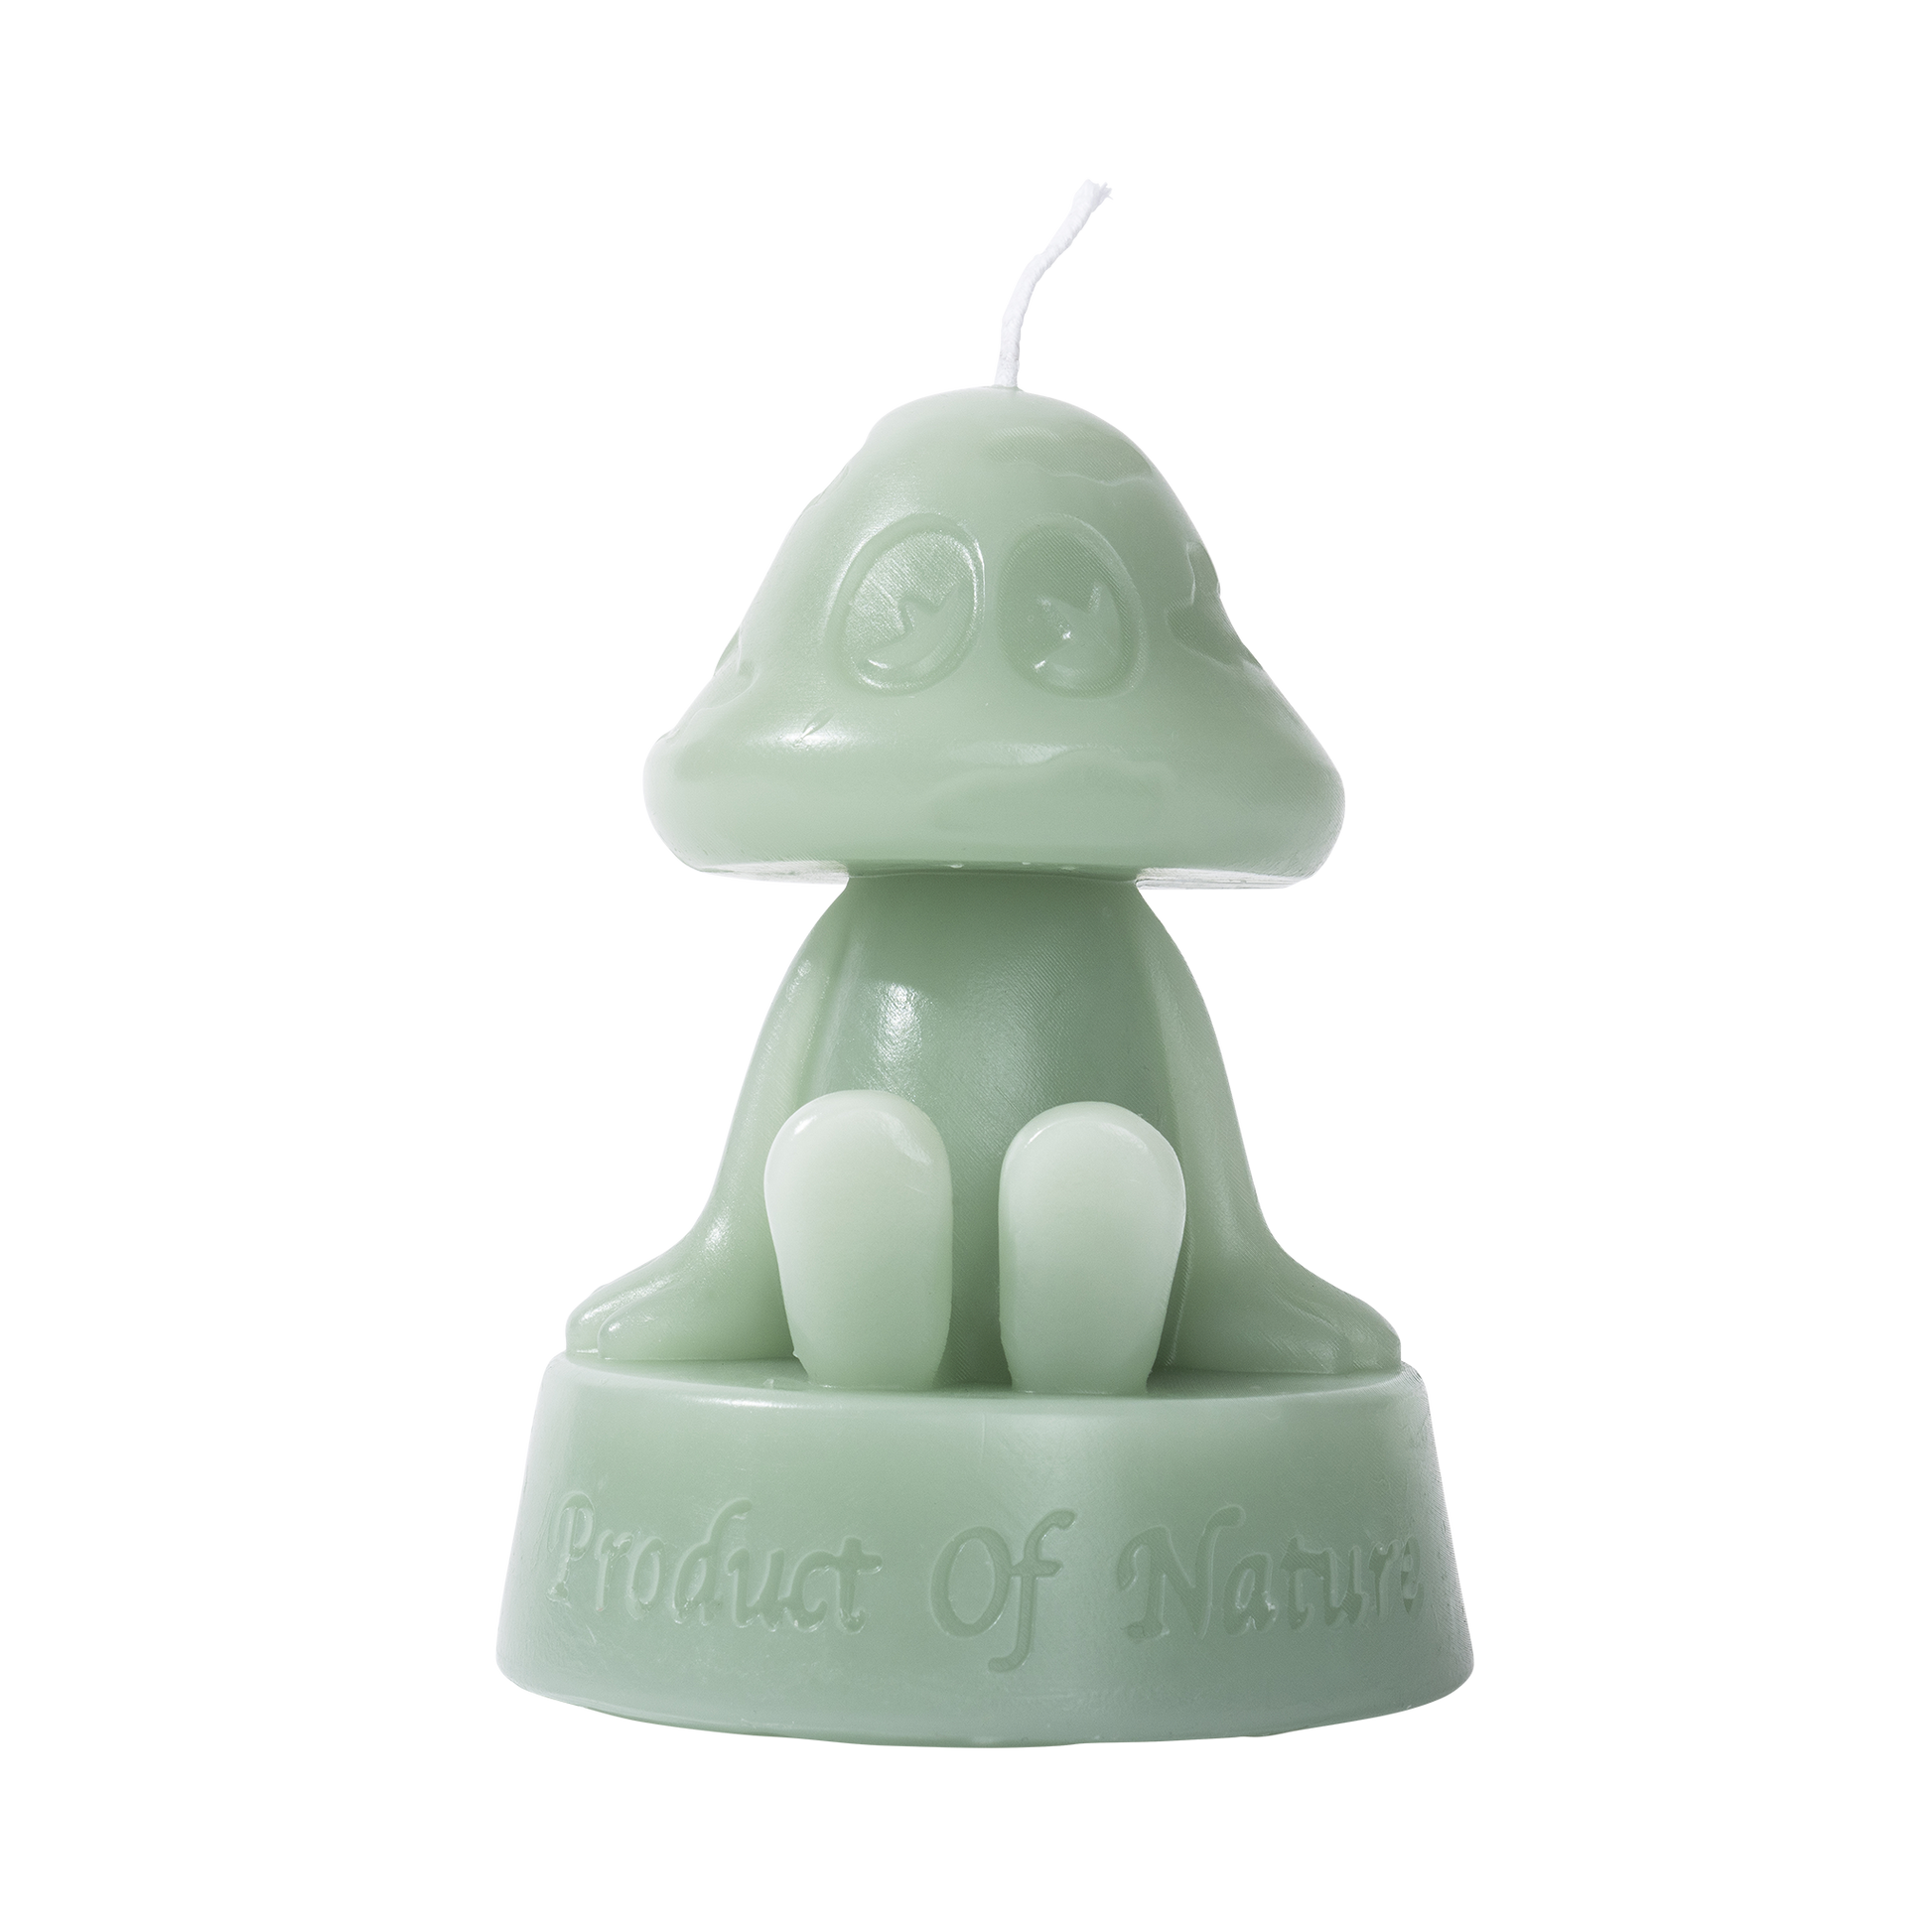 MARKET clothing brand FANTASY FARM CHARACTER MOLD CANDLE. Find more homegoods and graphic tees at MarketStudios.com. Formally Chinatown Market. 